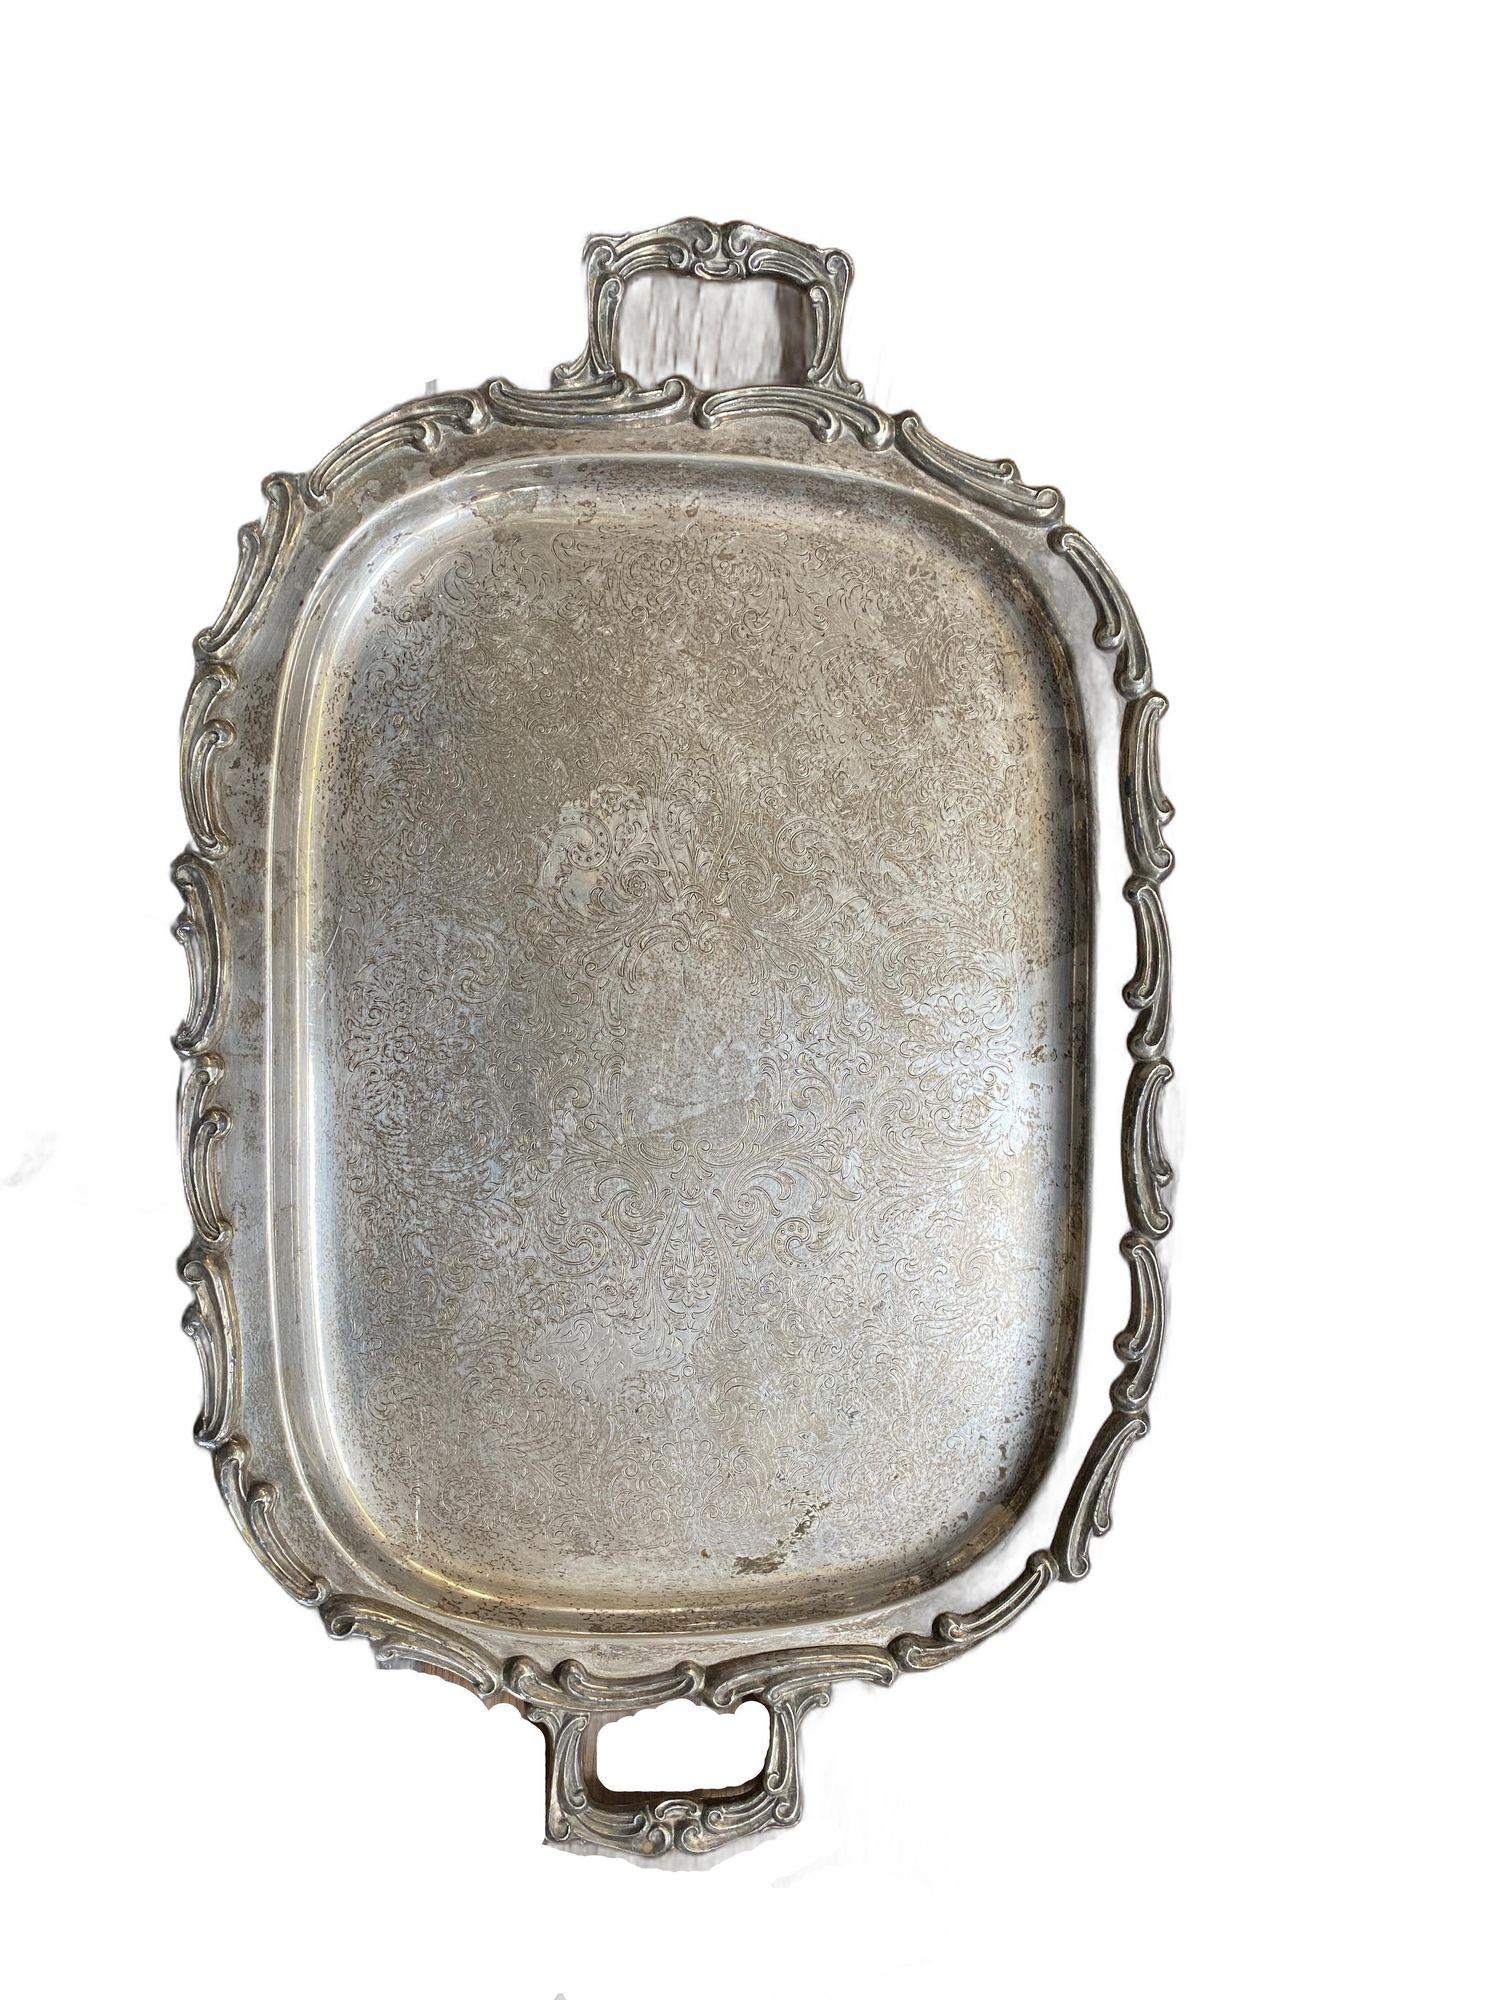 This exquisite silverplate serving tray dates back to 1900, boasting a stunning scrollwork design adorned with shells. Stamped with the 